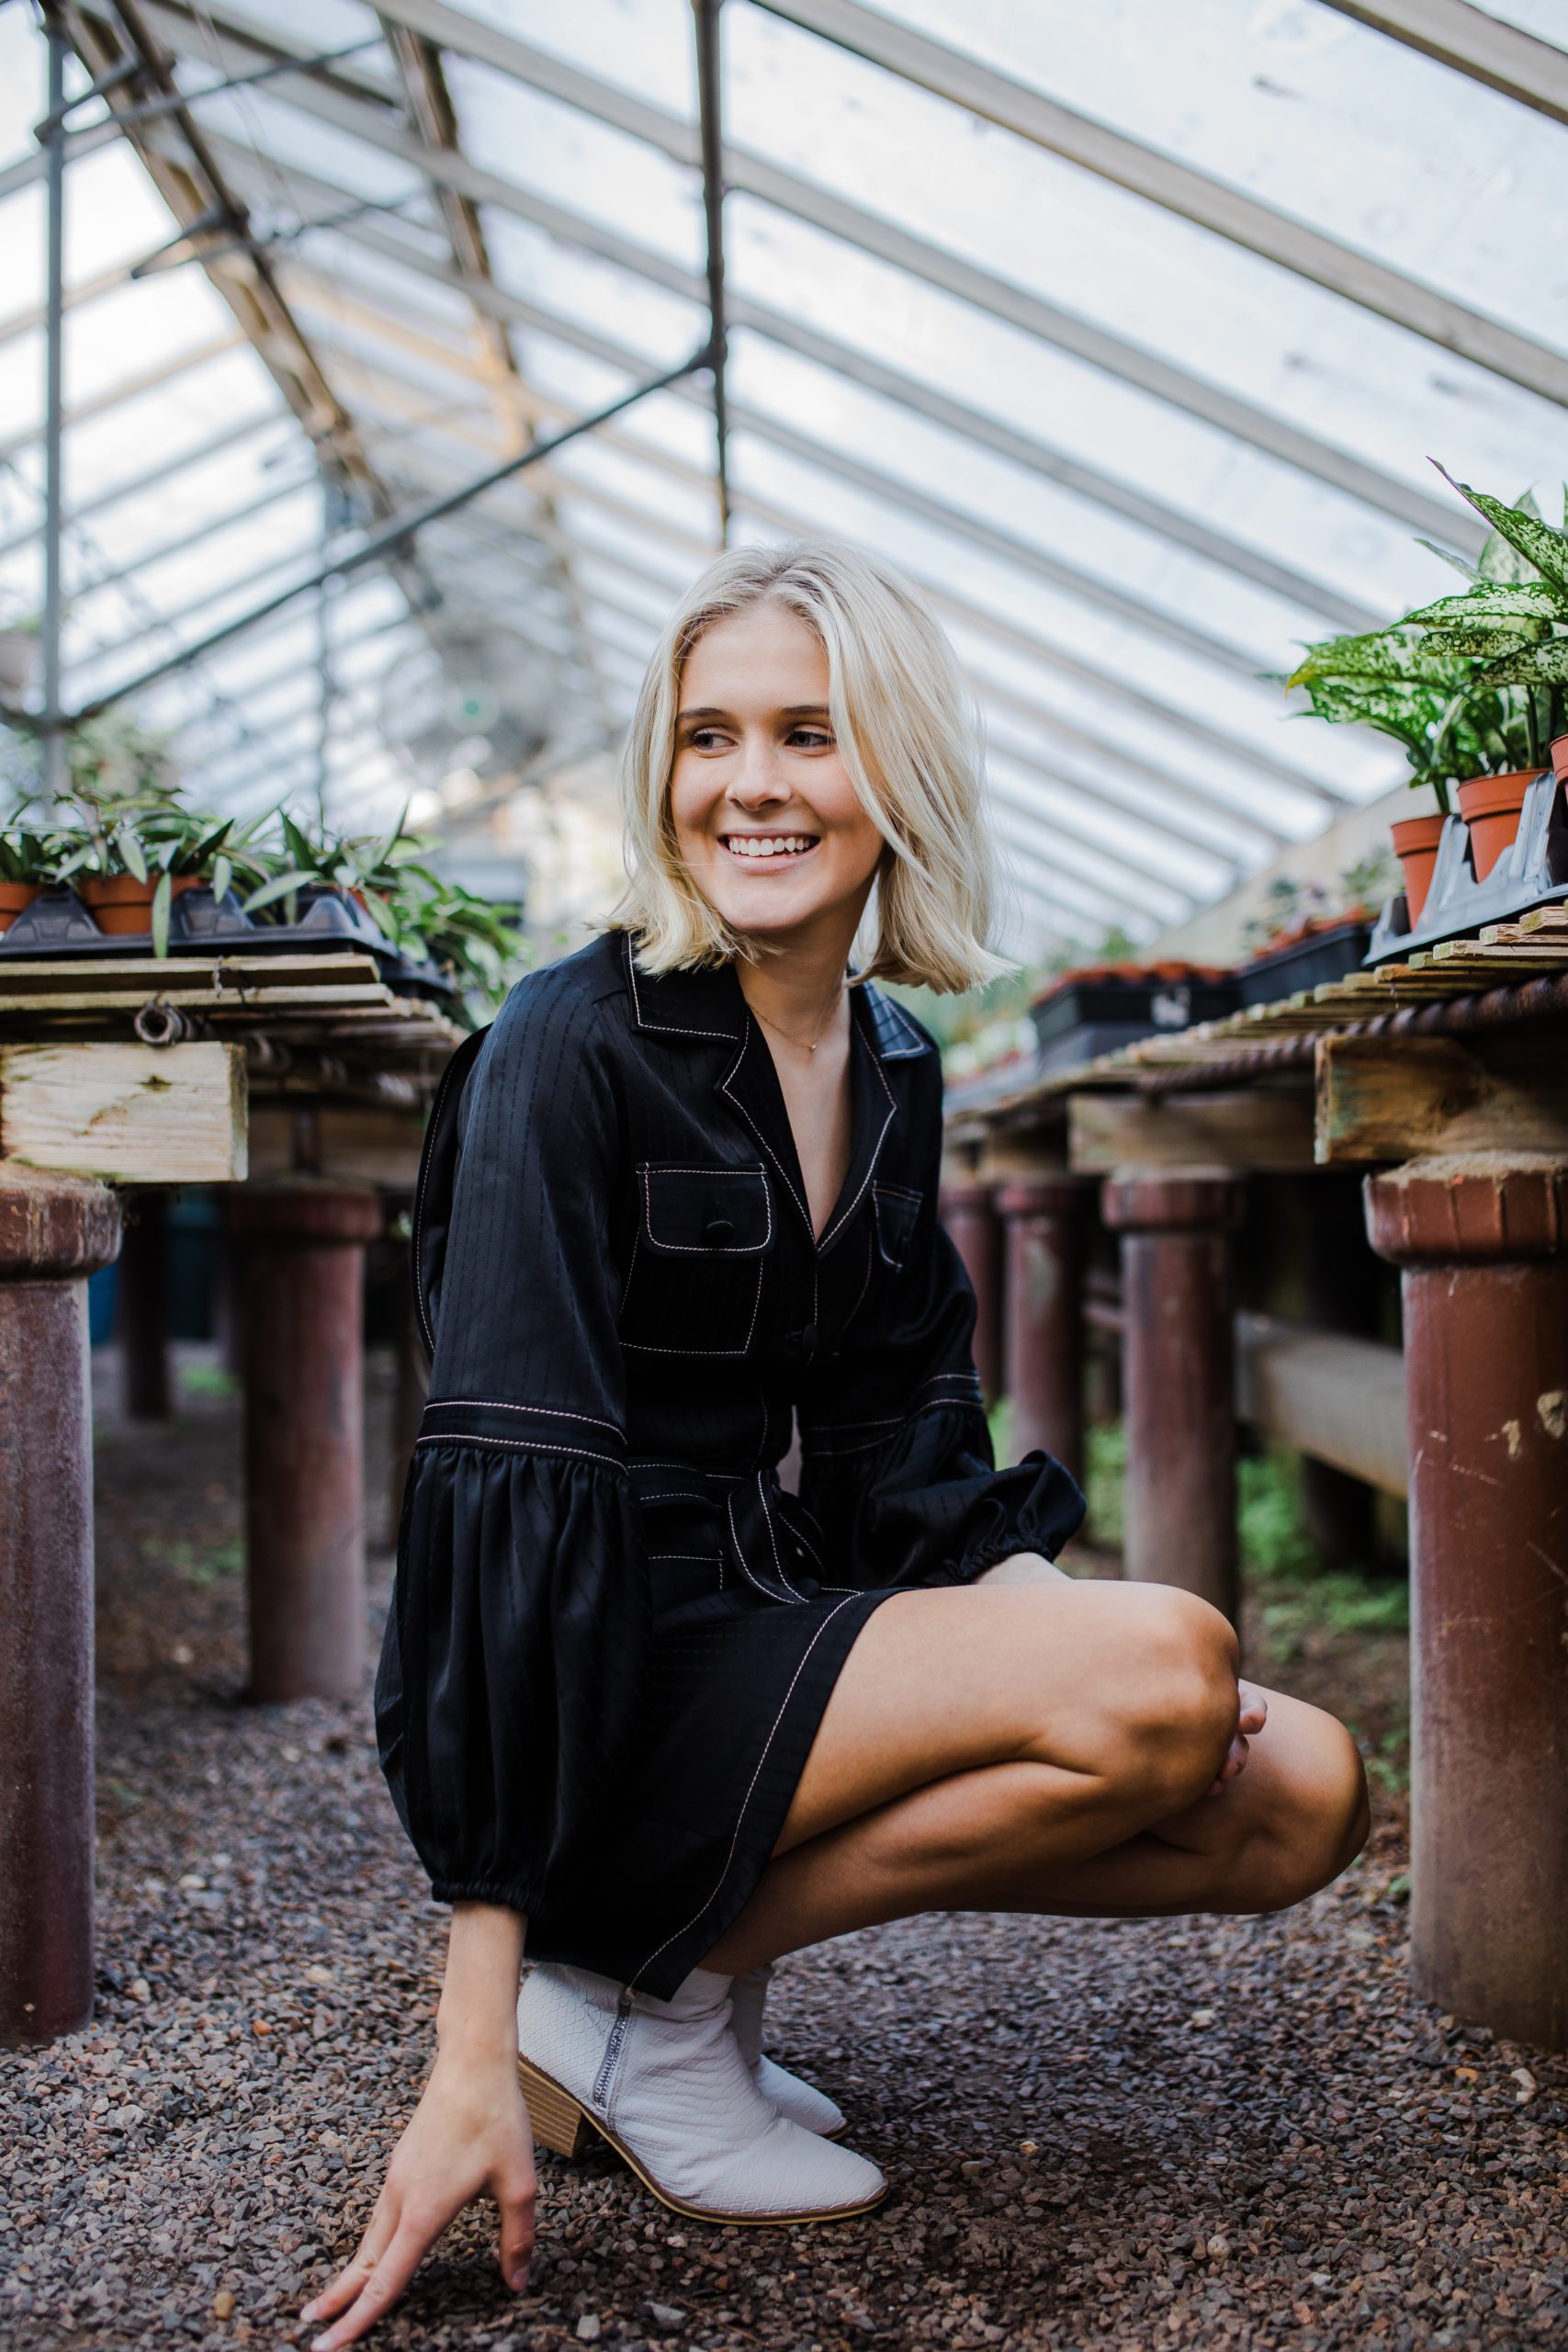 high school senior photographer captures young woman in a greenhouse in all black smiling as she crouches down 